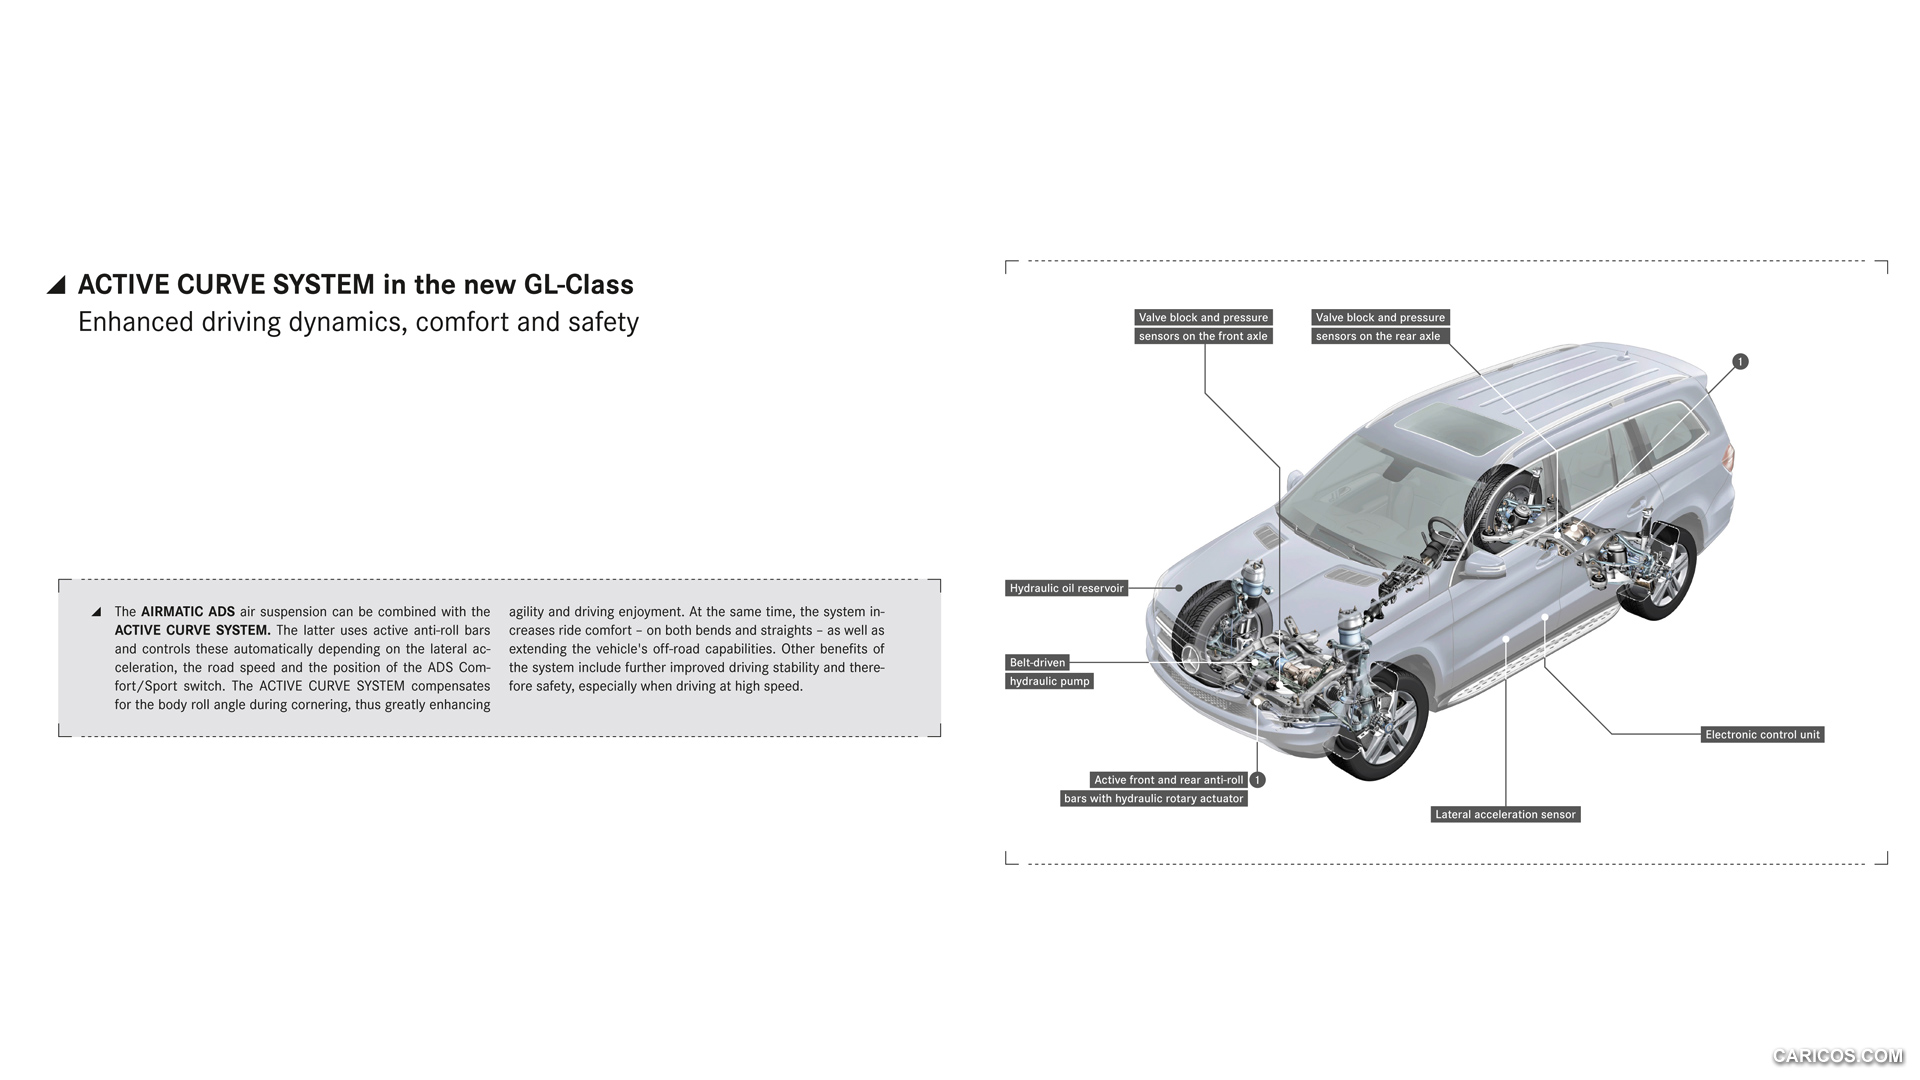 2013 Mercedes-Benz GL-Class Assistance and Safety Systems - ACTIVE CURVE SYSTEM - , #207 of 259